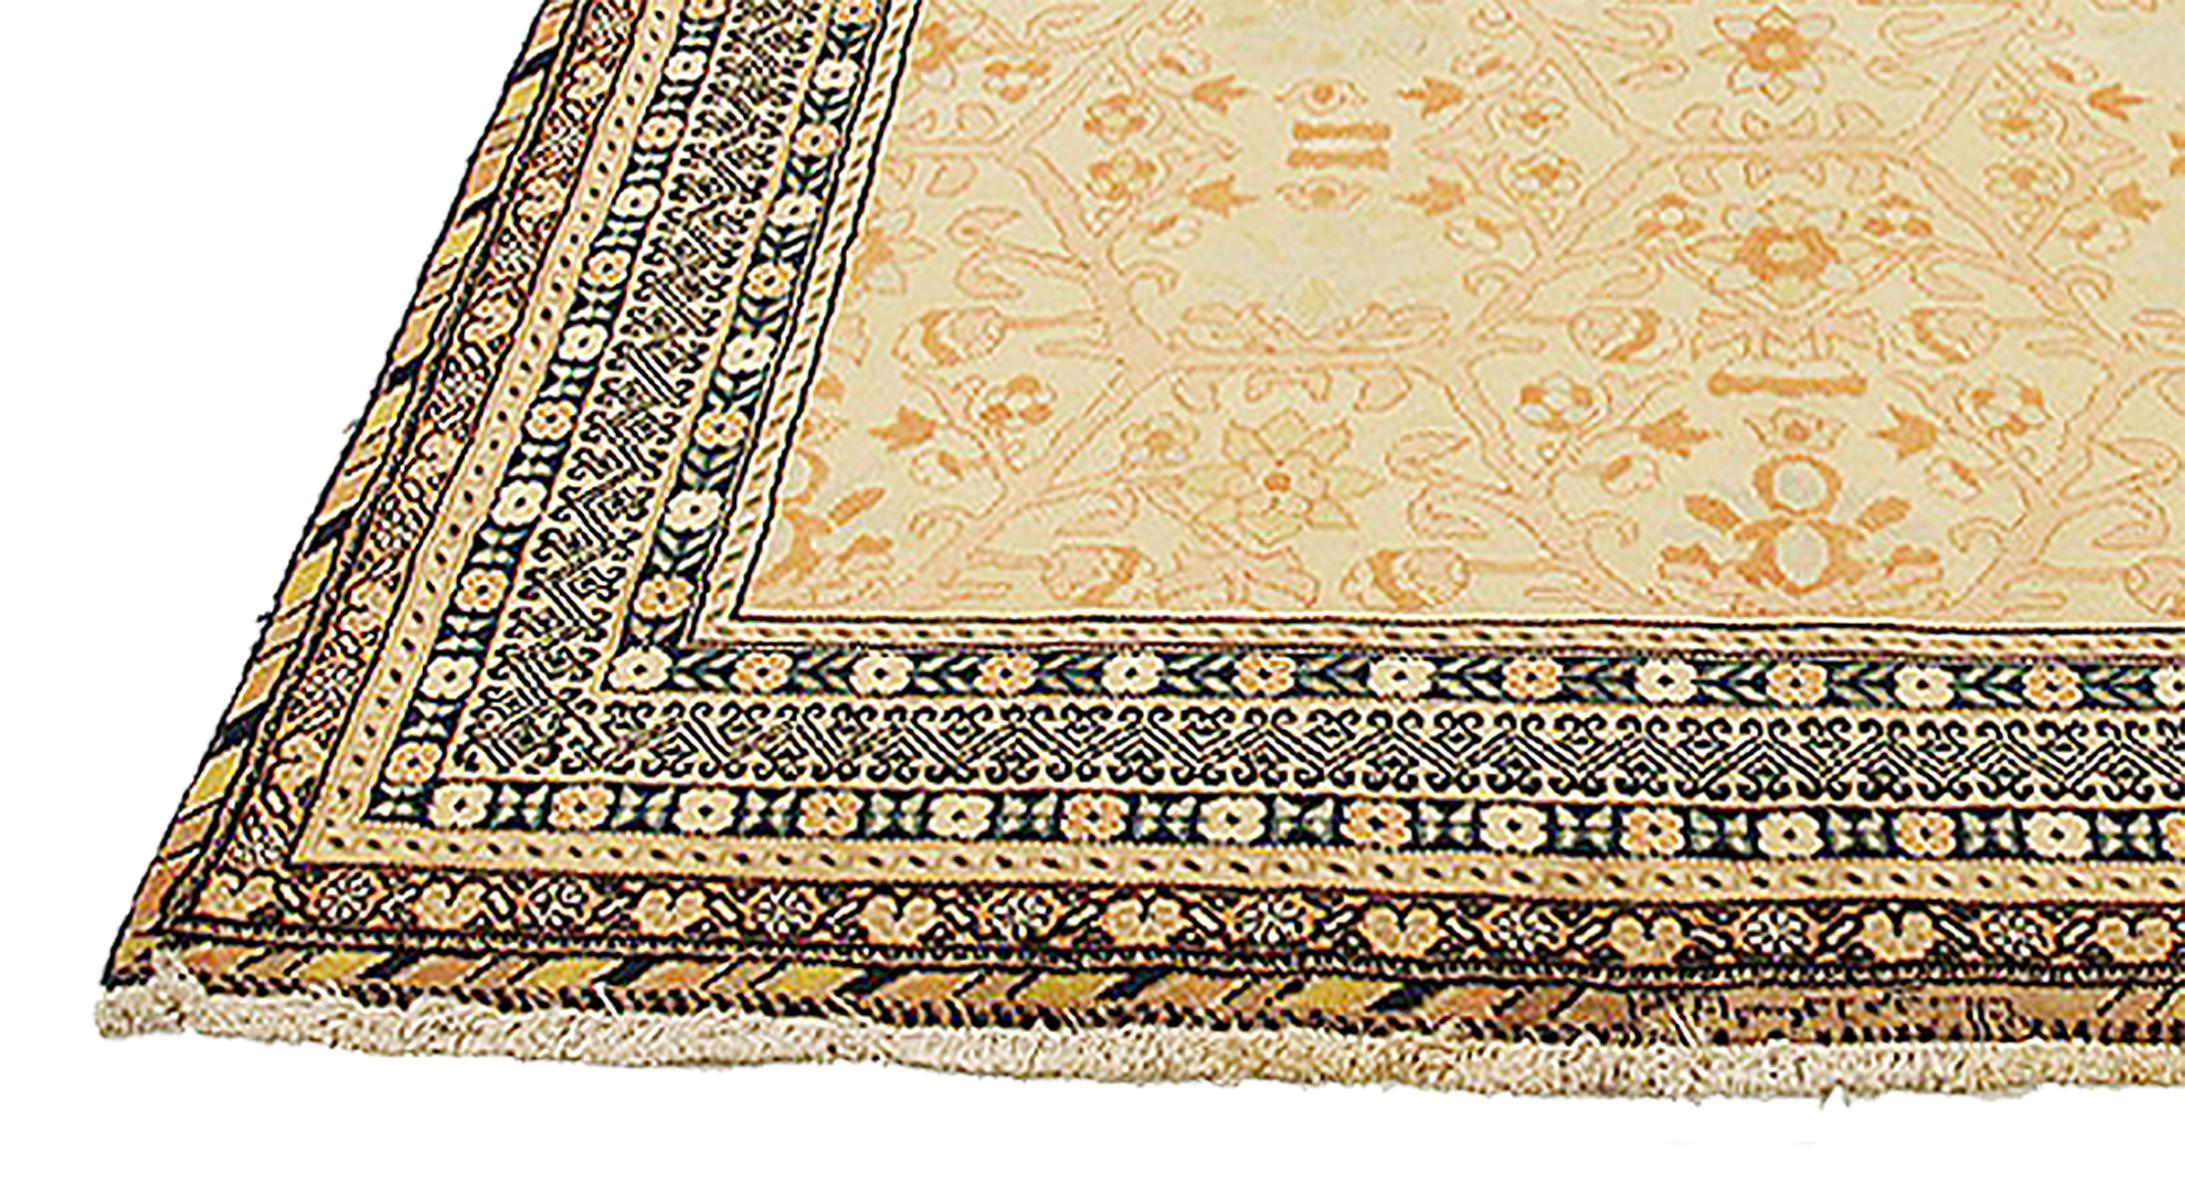 Hand-Woven Antique Persian Bakhtiar Rug with Brown and Pink Floral Details on Ivory Field